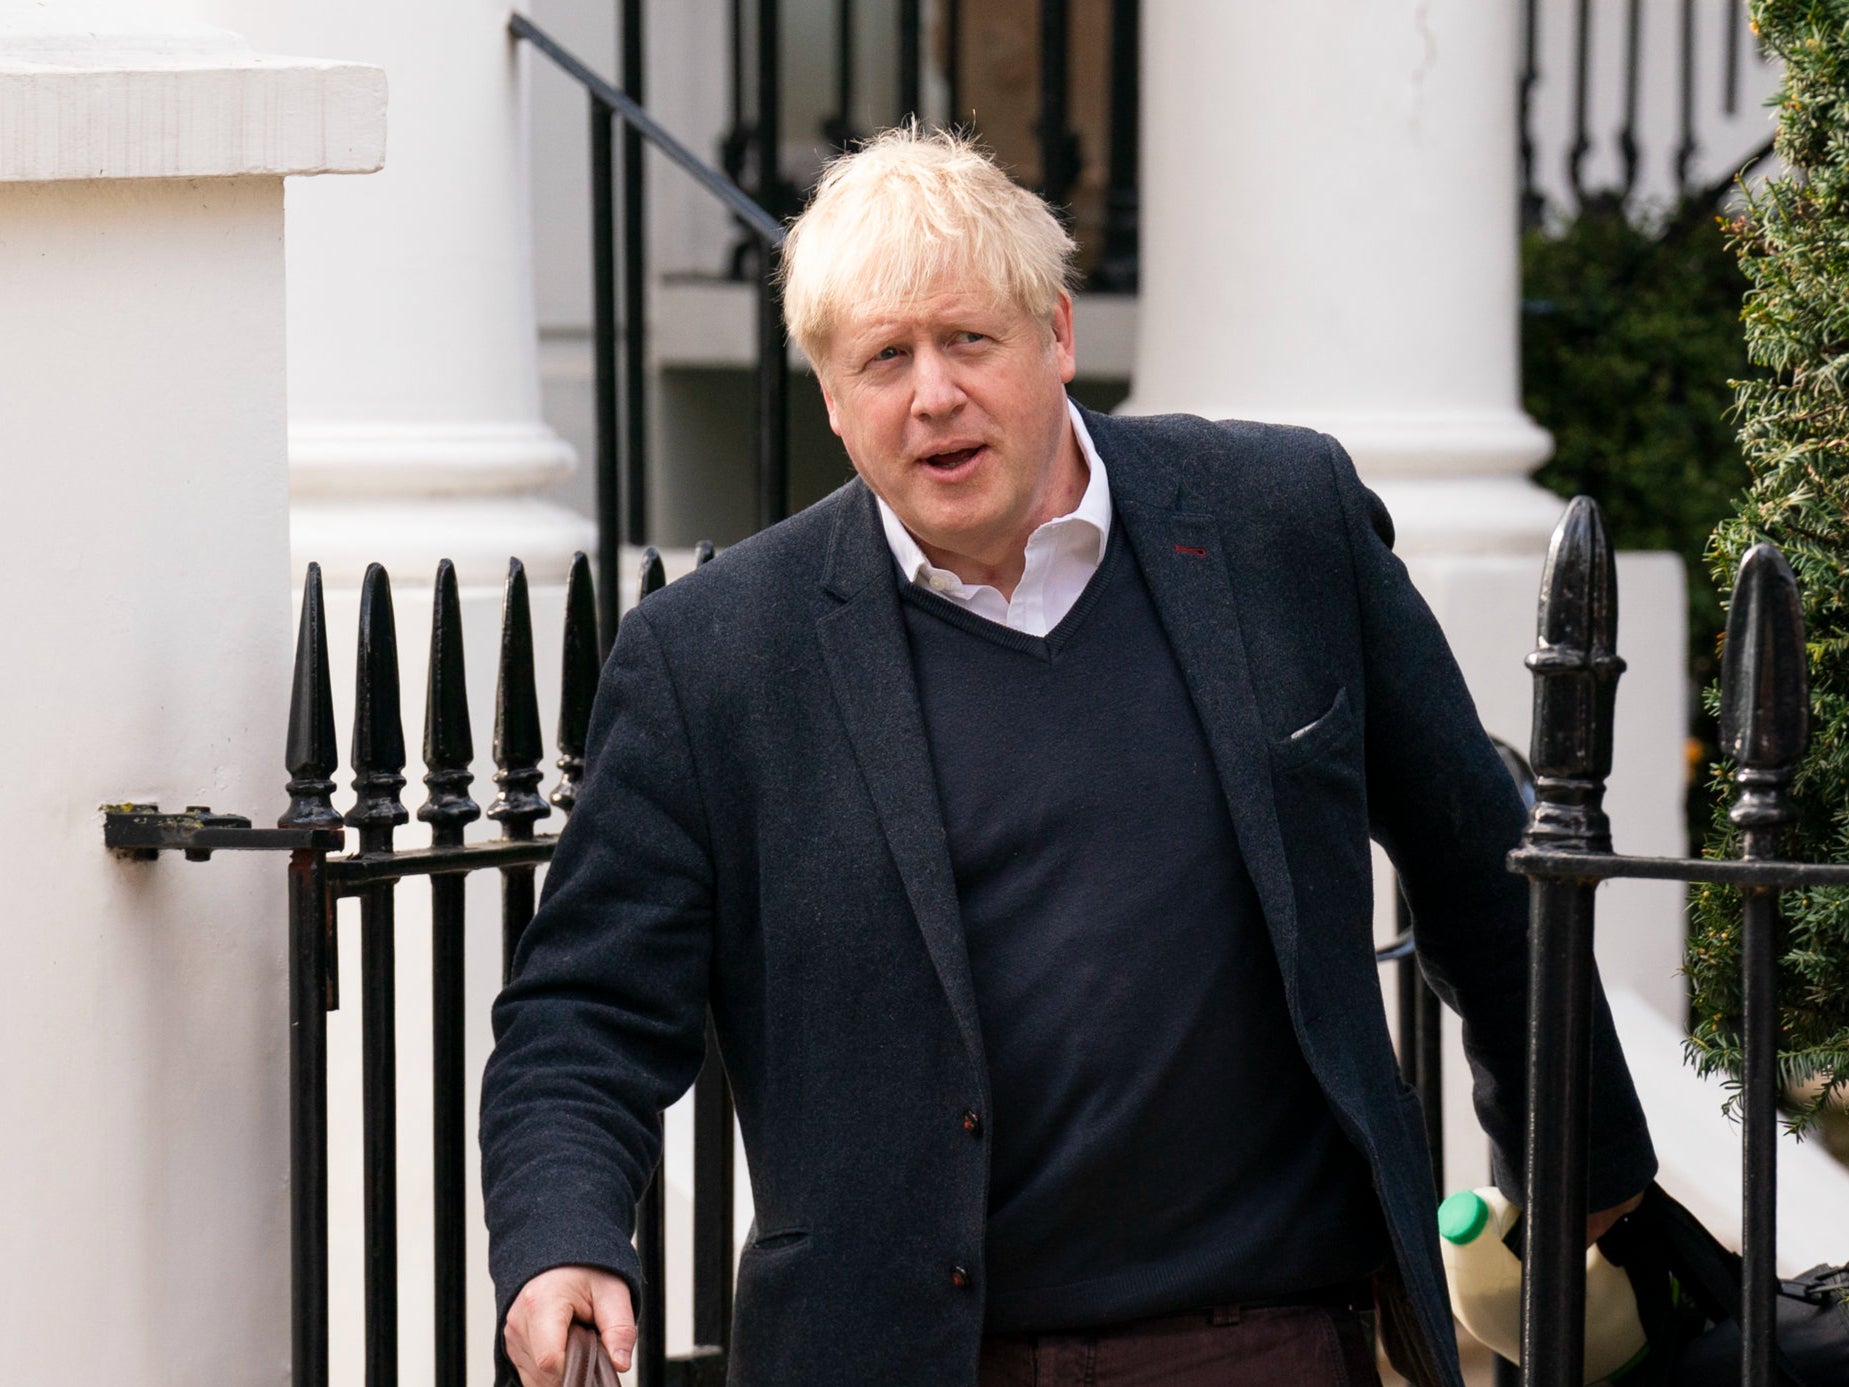 In some ways, Johnson’s case is more serious as it involves the matter of whether a prime minister lied to parliament